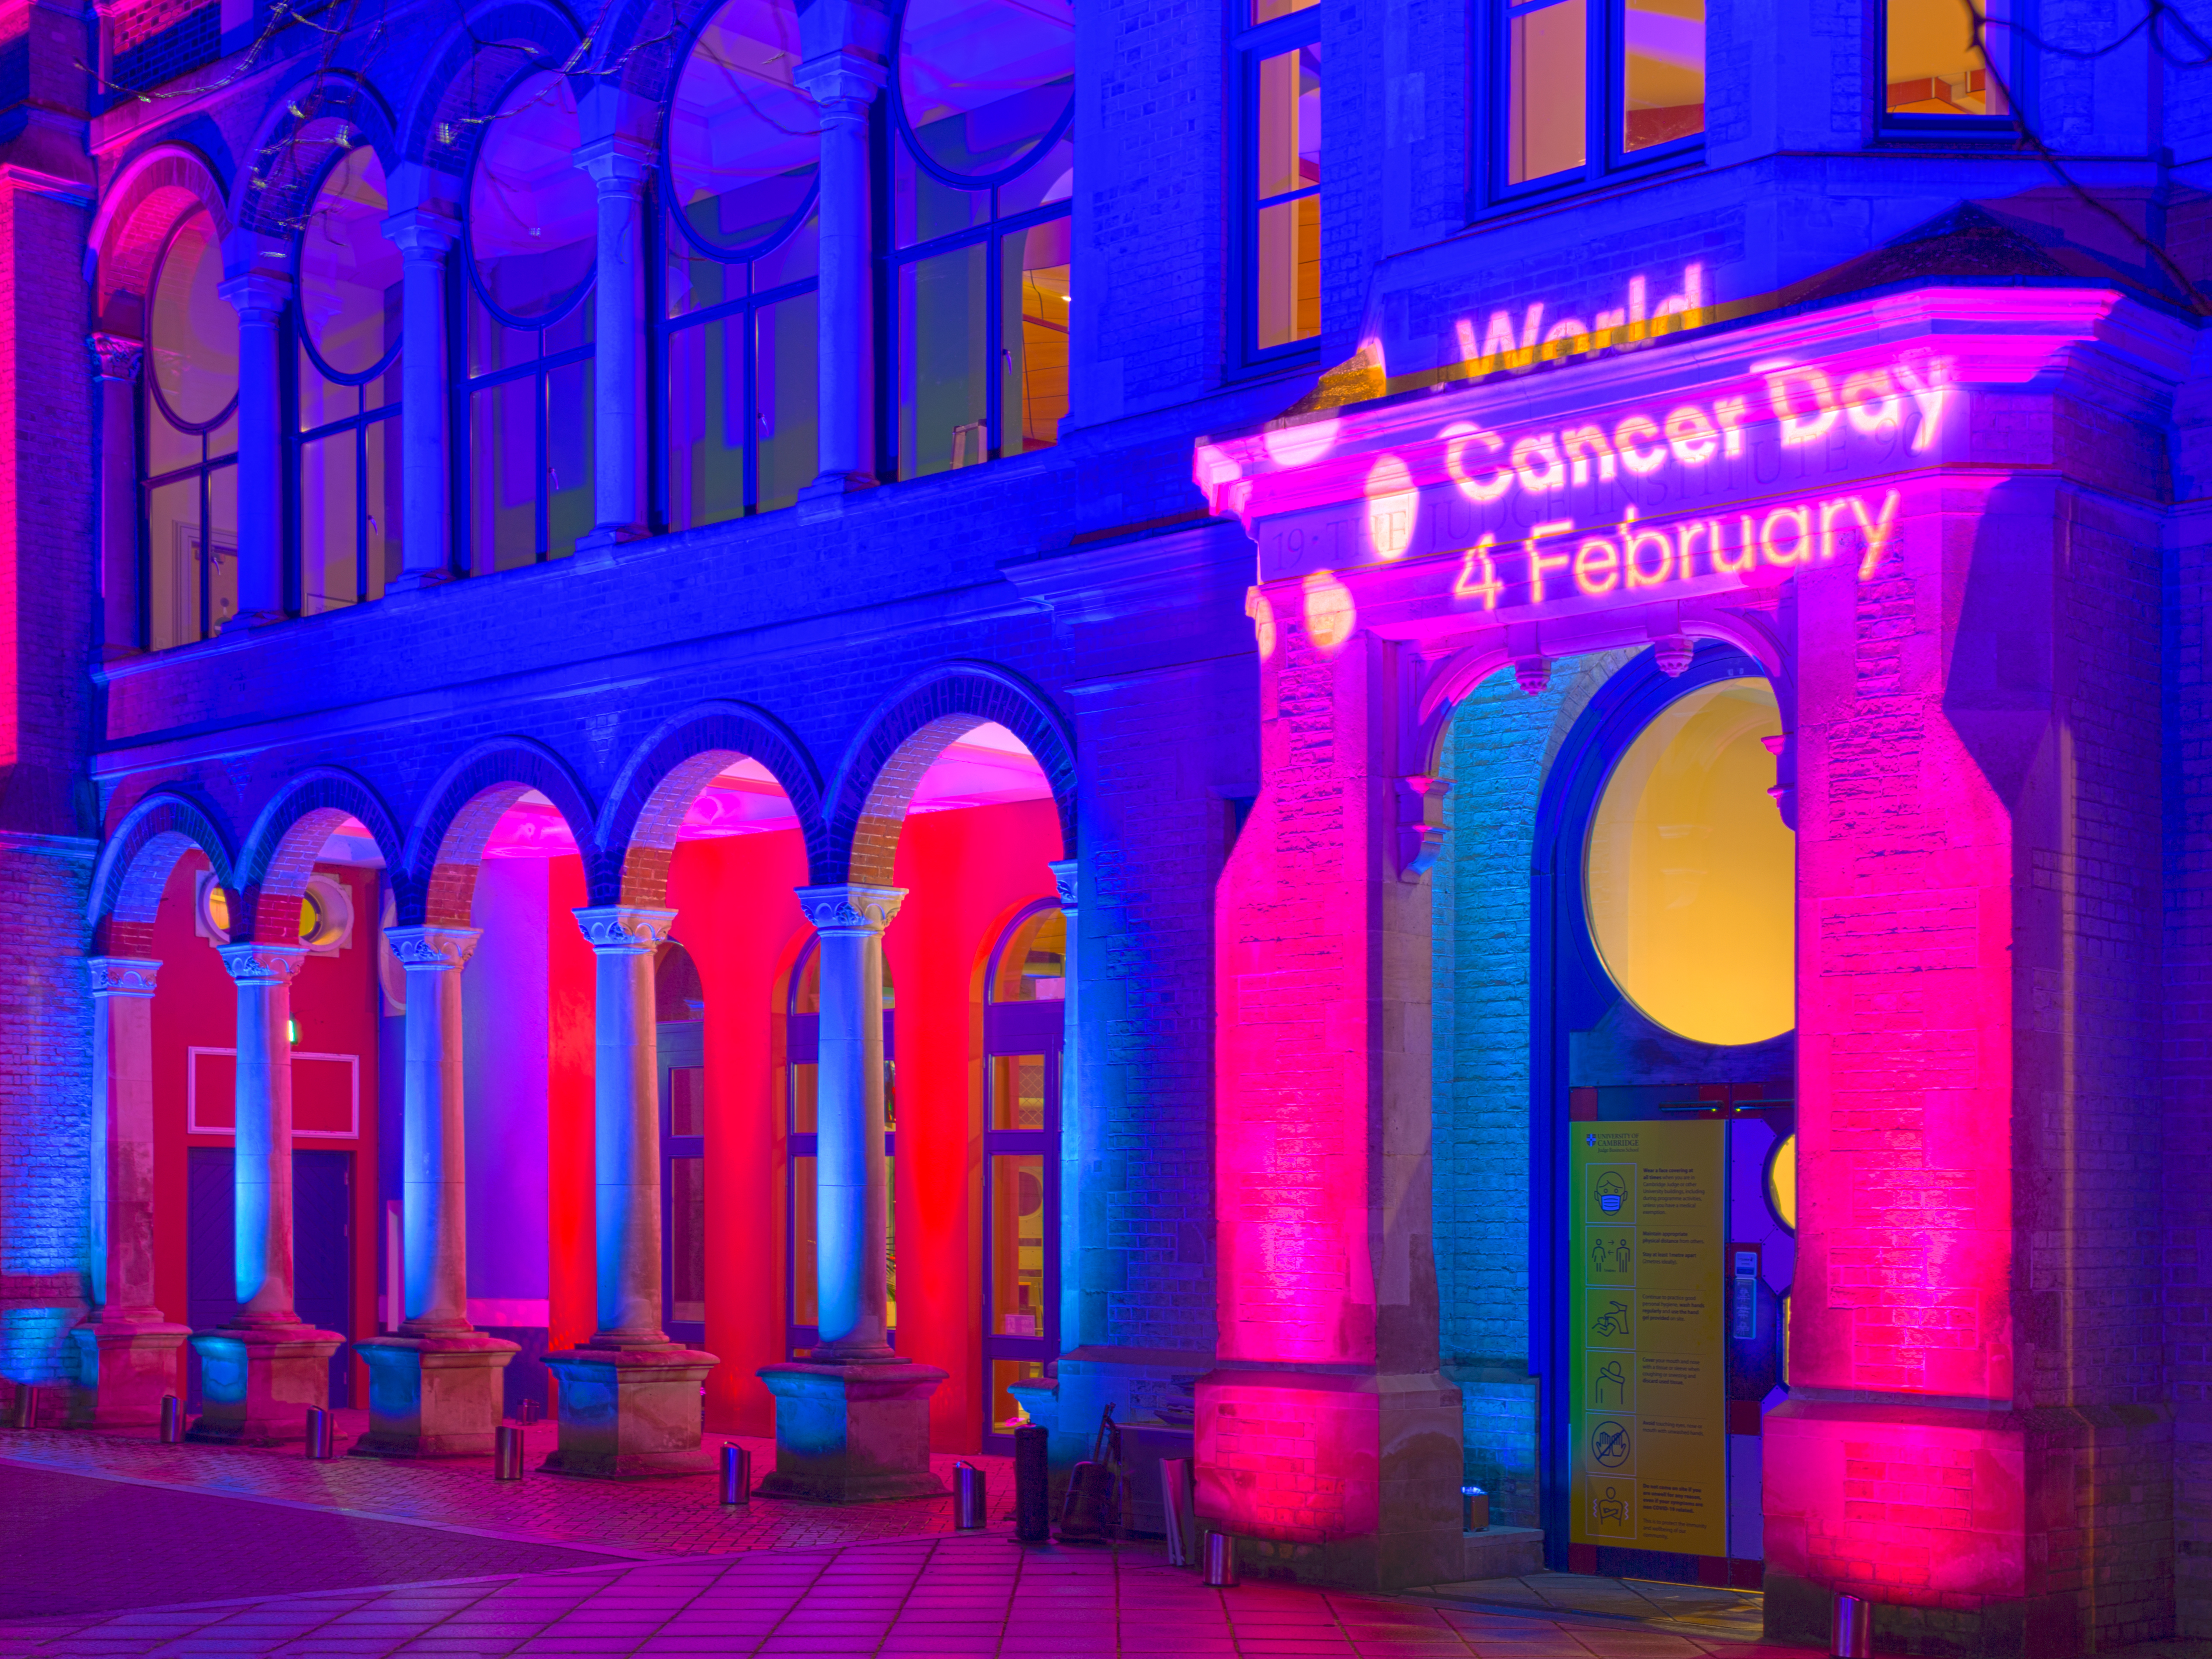 The Cambridge Judge Business School lit up for World Cancer Day